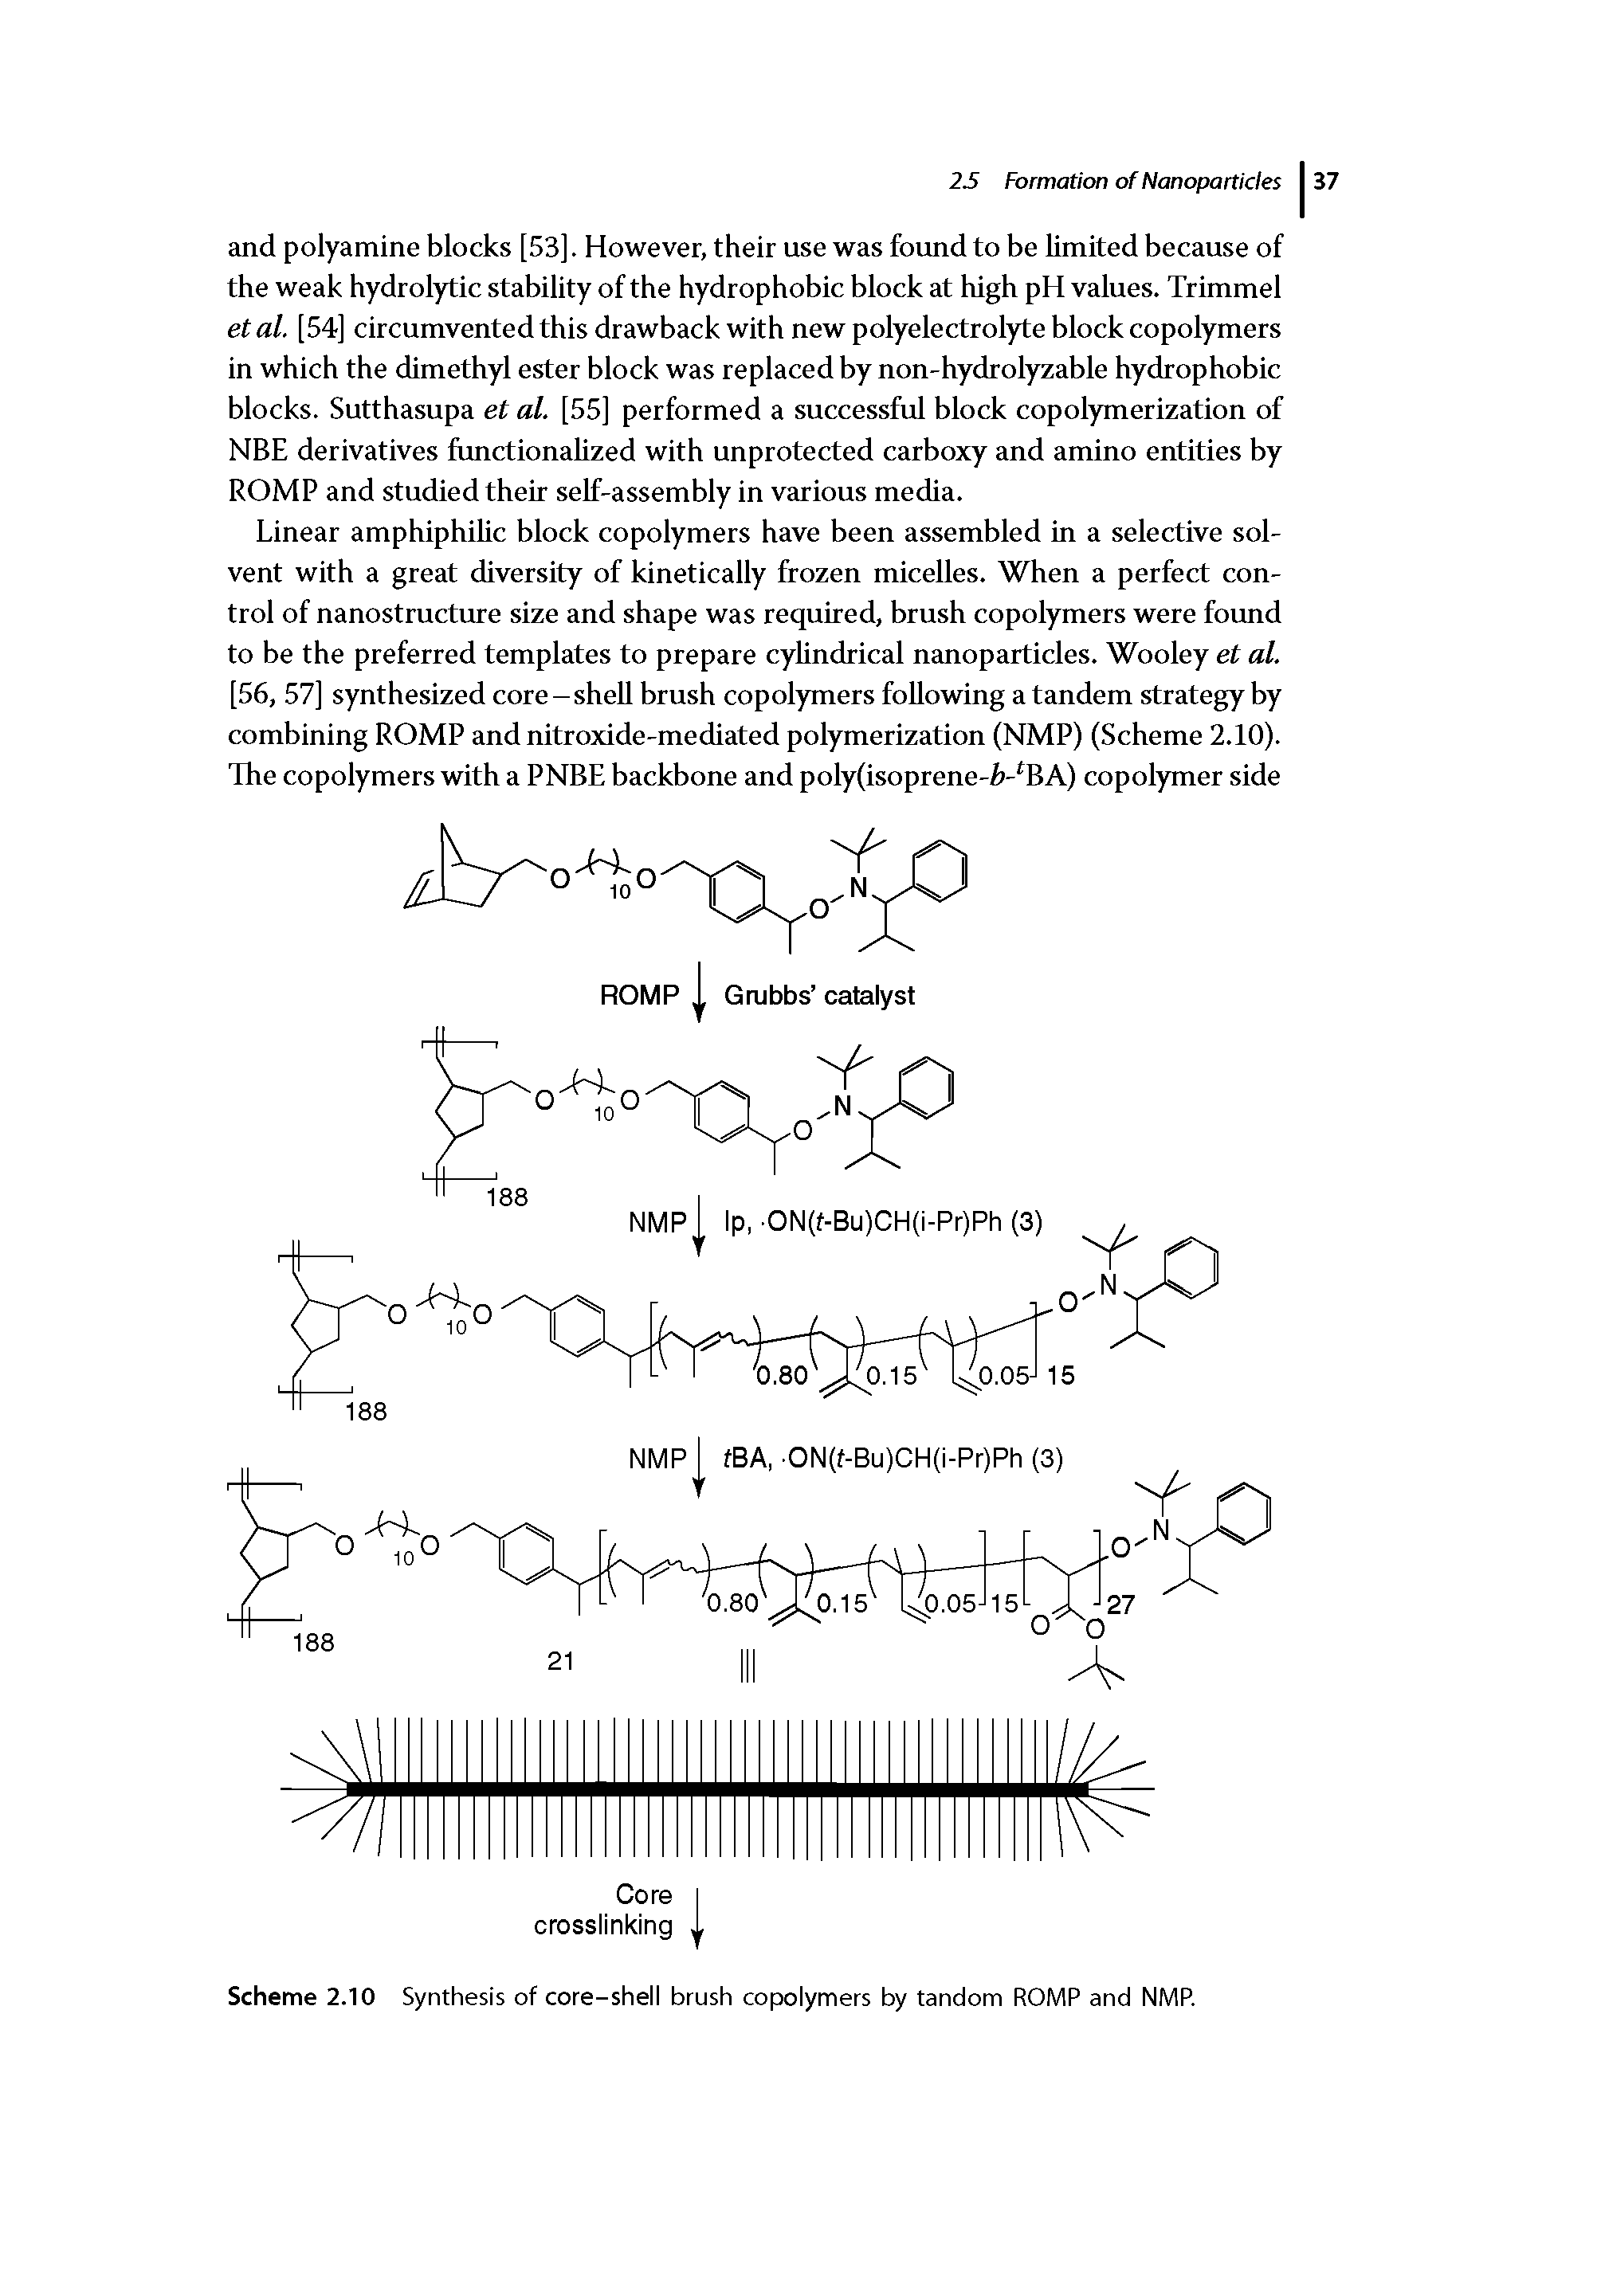 Scheme 2.10 Synthesis of core-shell brush copolymers by random ROMP and NMP.